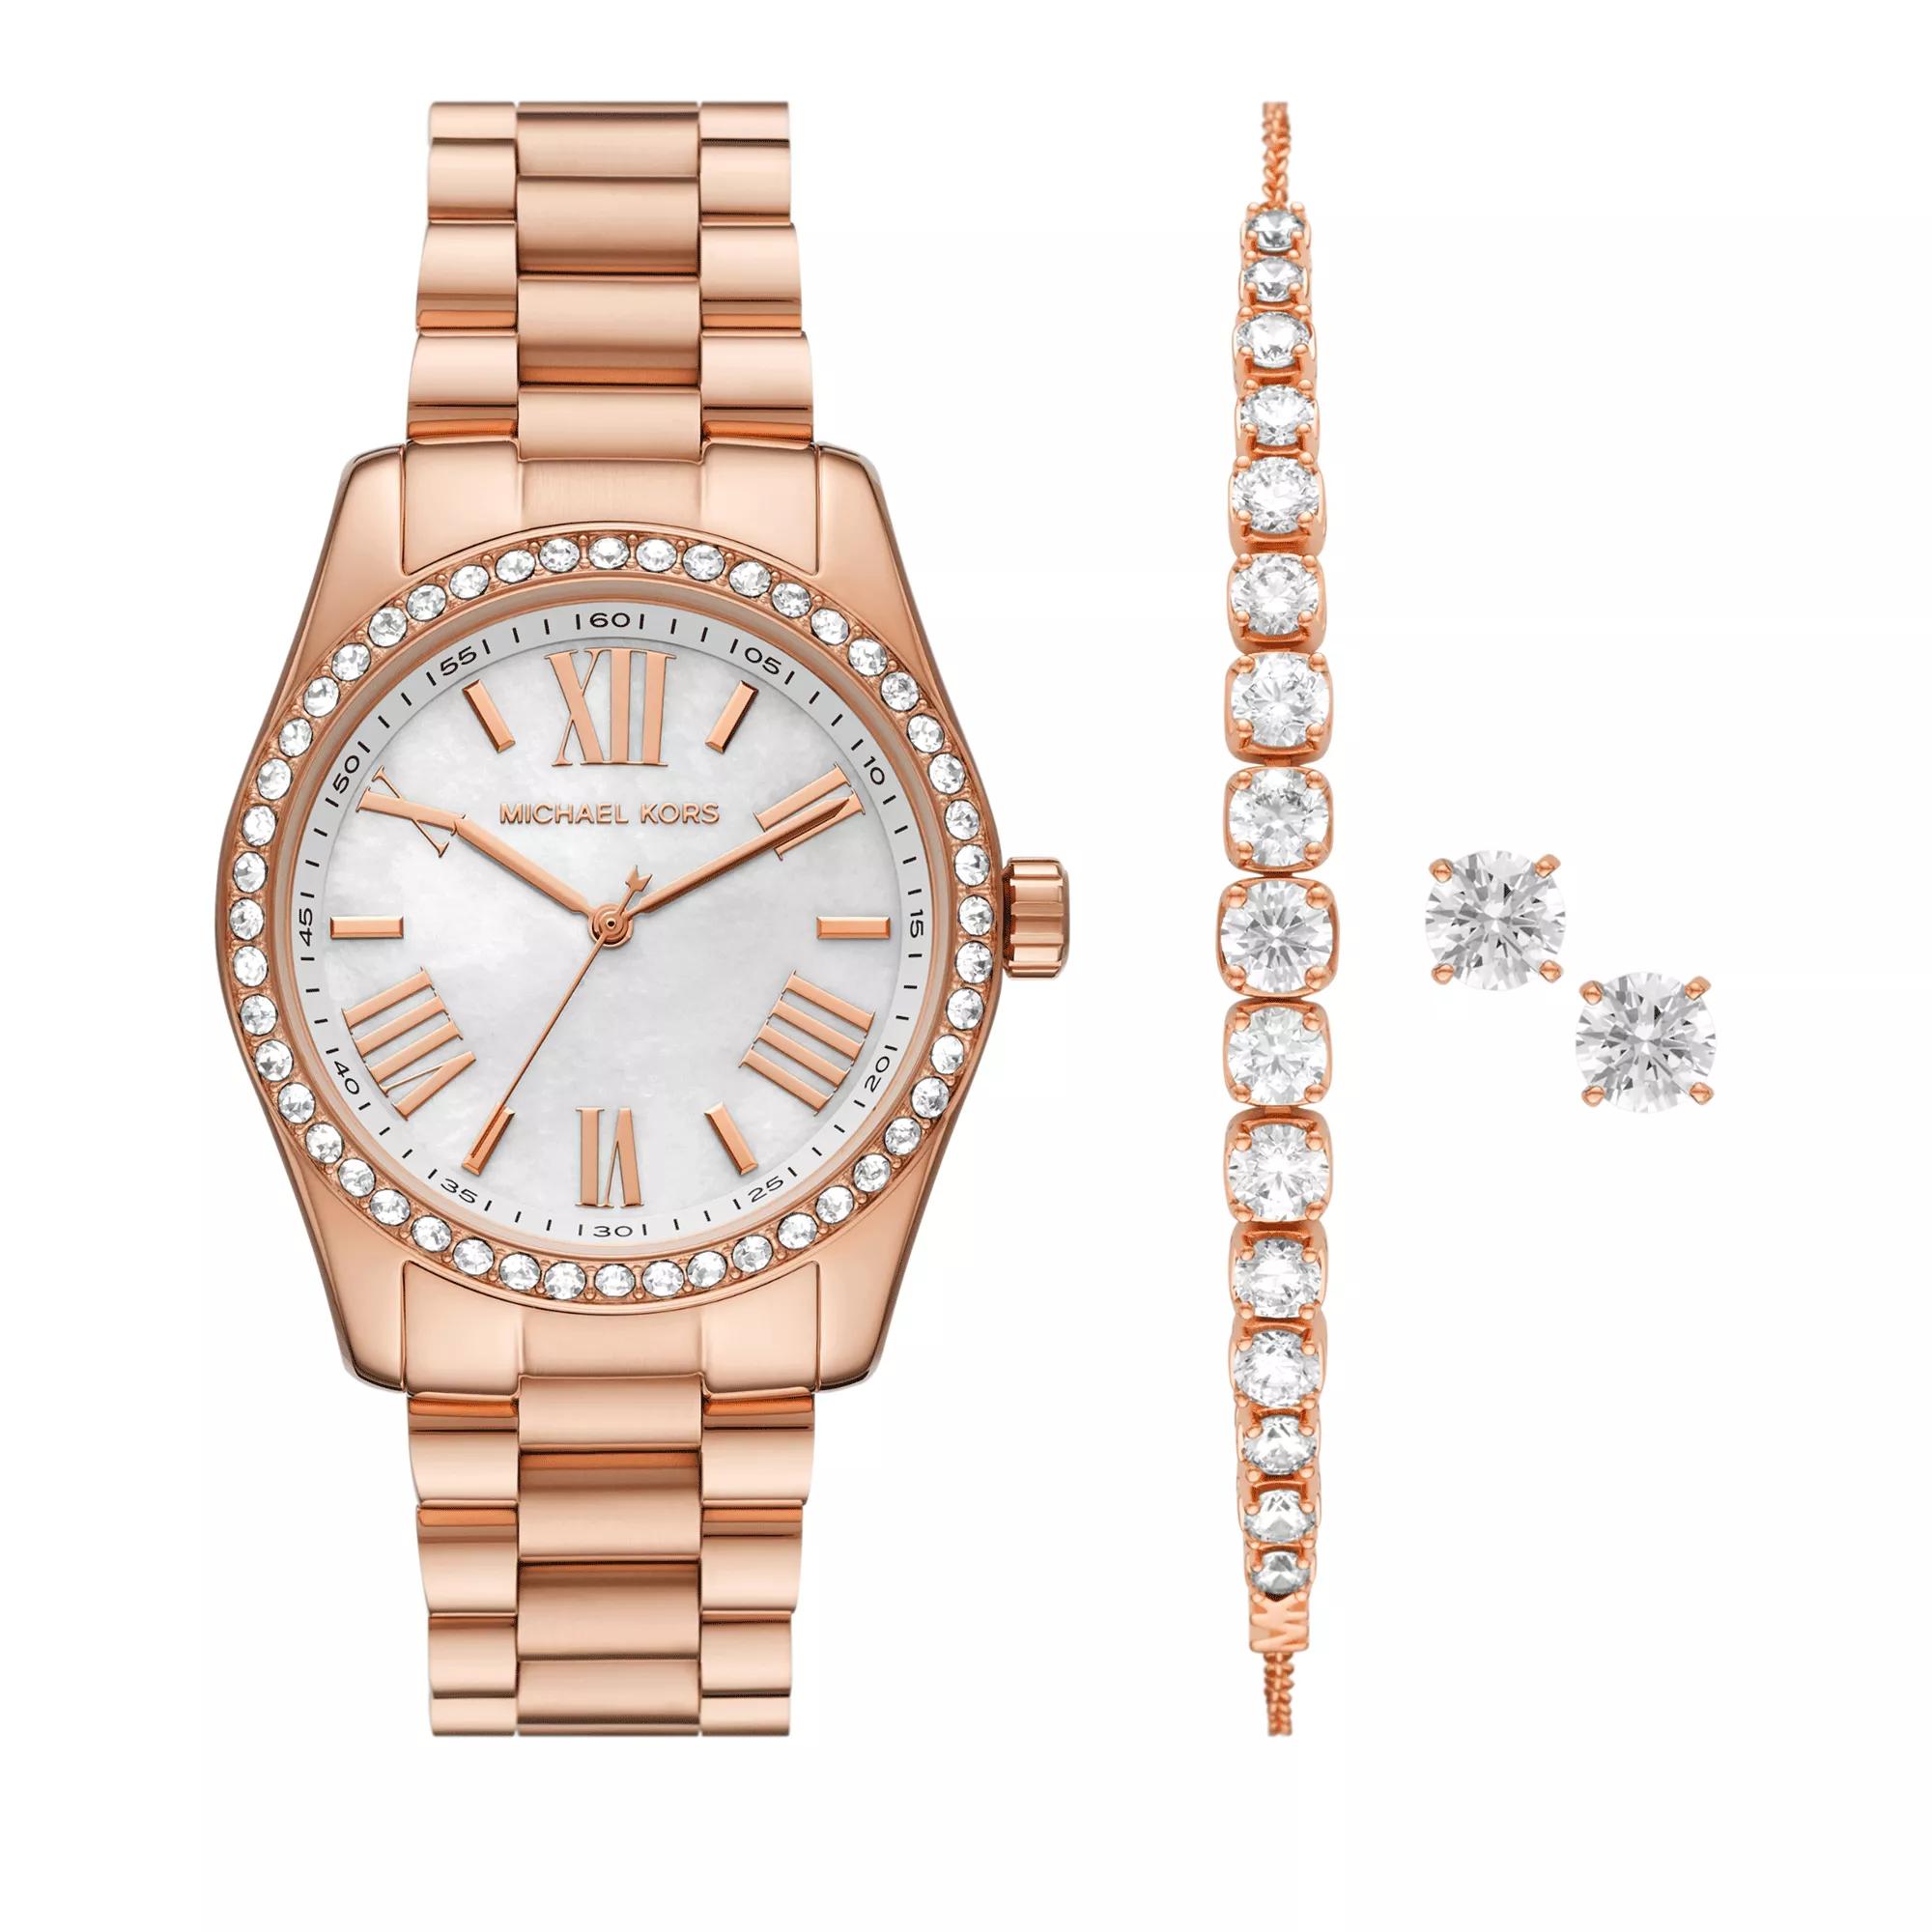 Michael Kors Lexington Three-Hand Stainless Quarz-Uhr Steel and Jewellery Rose Watch Gold 